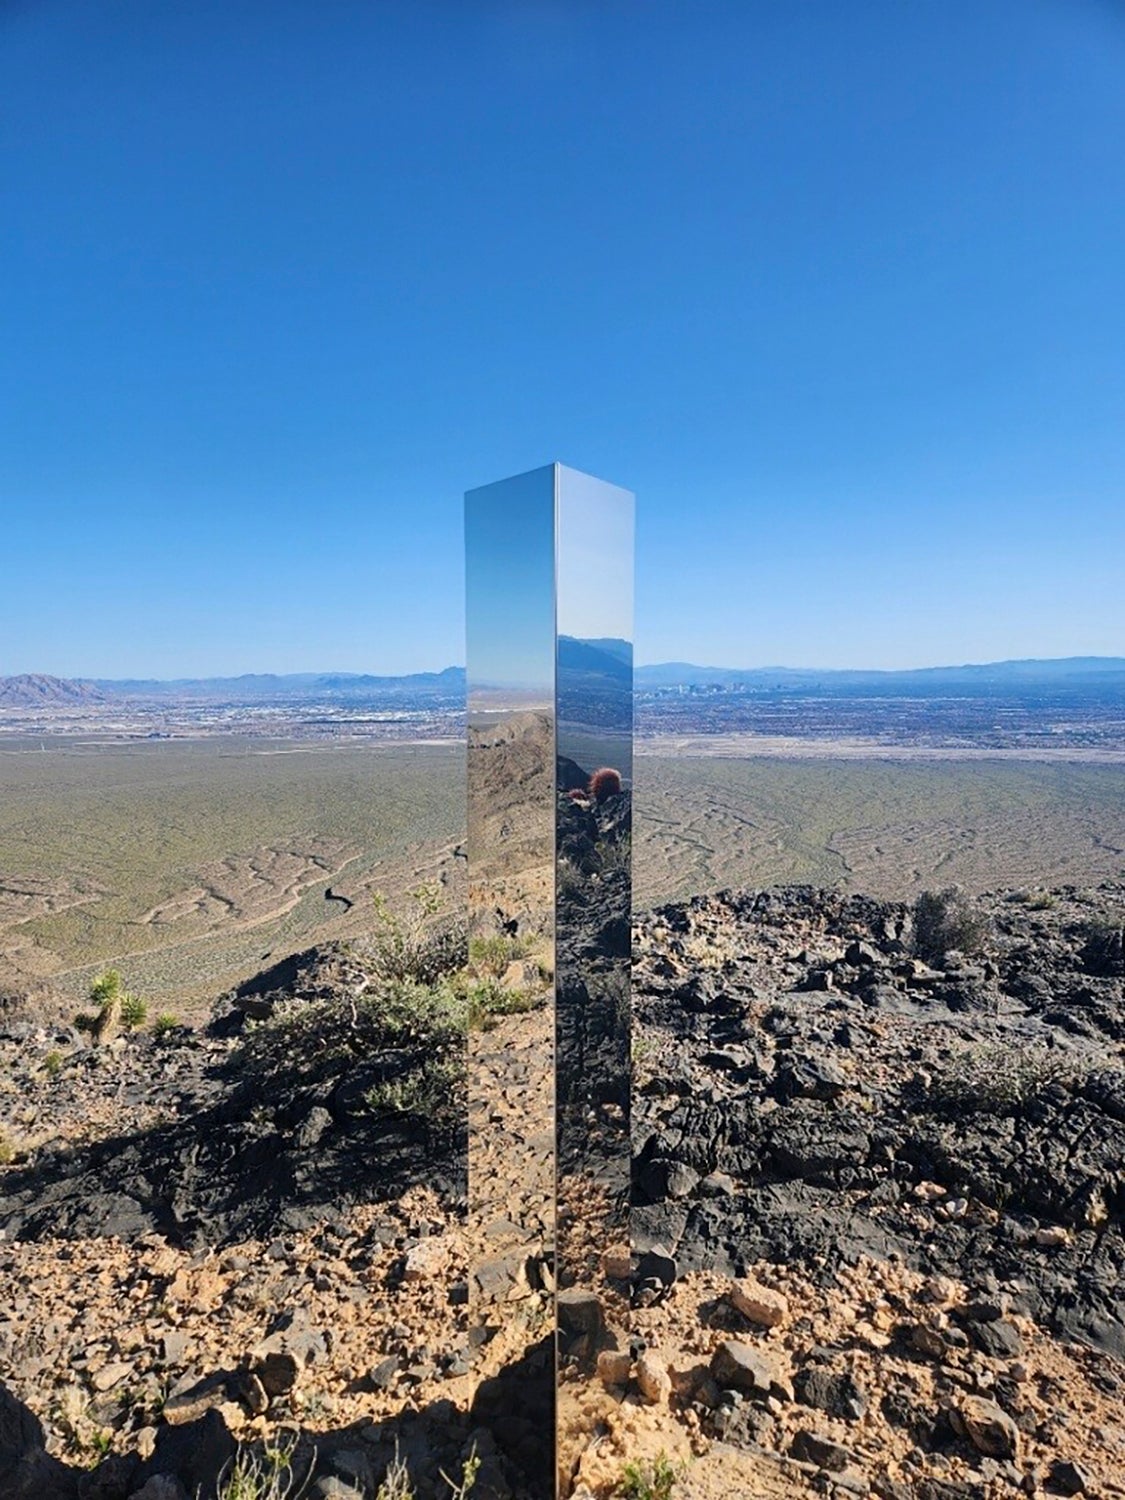 A mystery monolith popped up near Las Vegas earlier in June, but was removed by police